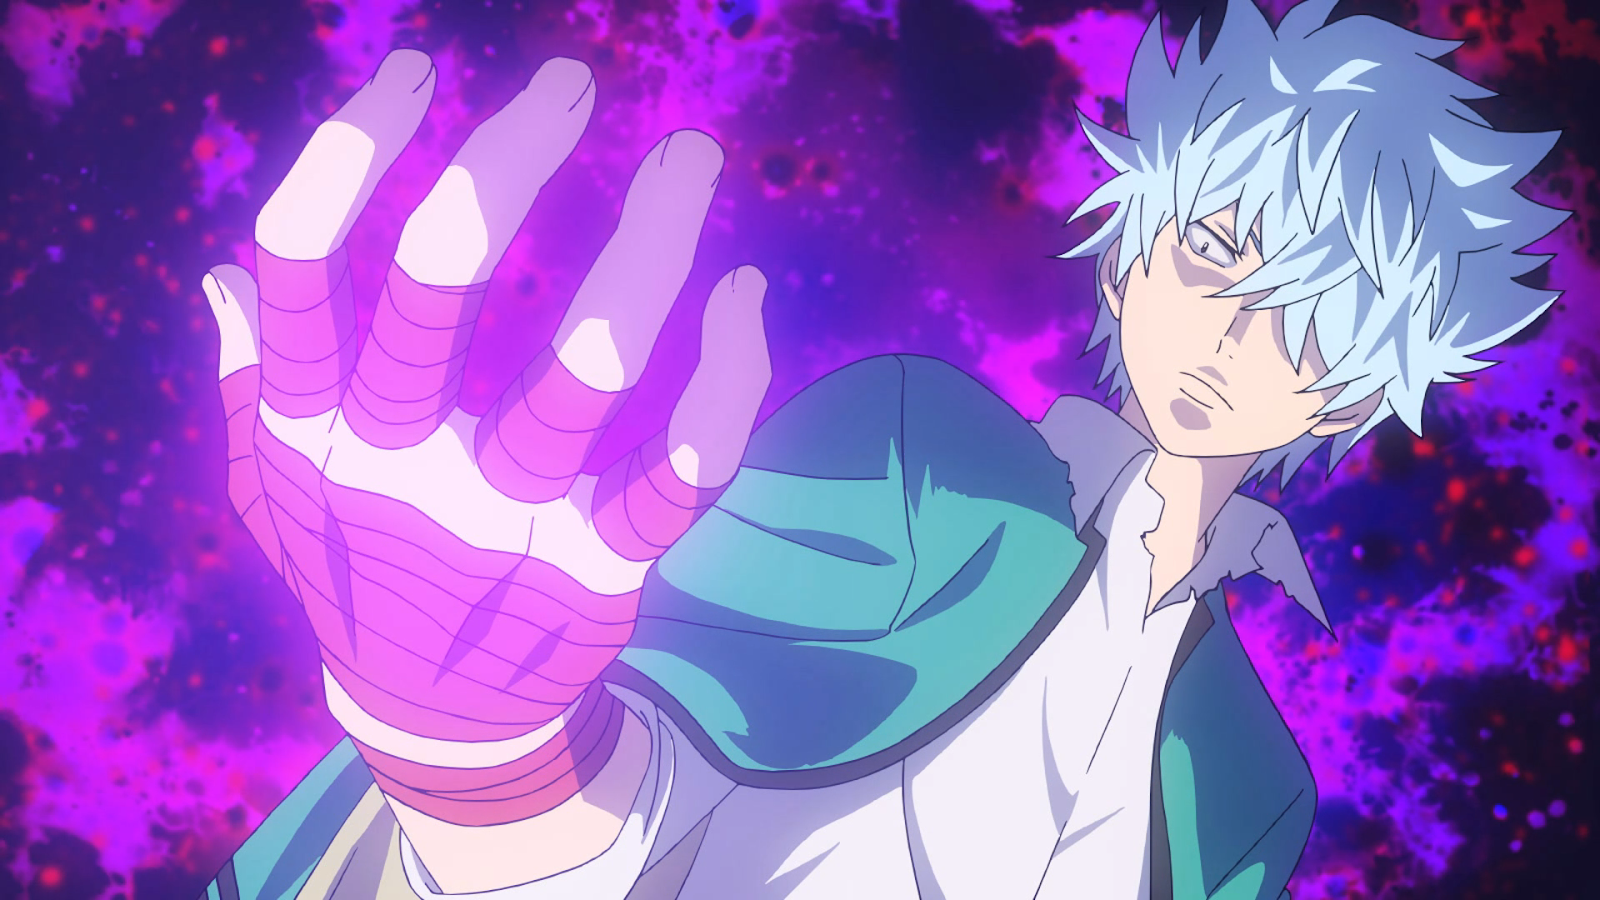 Crunchyroll - The 6 Most POWERFUL Characters in Anime